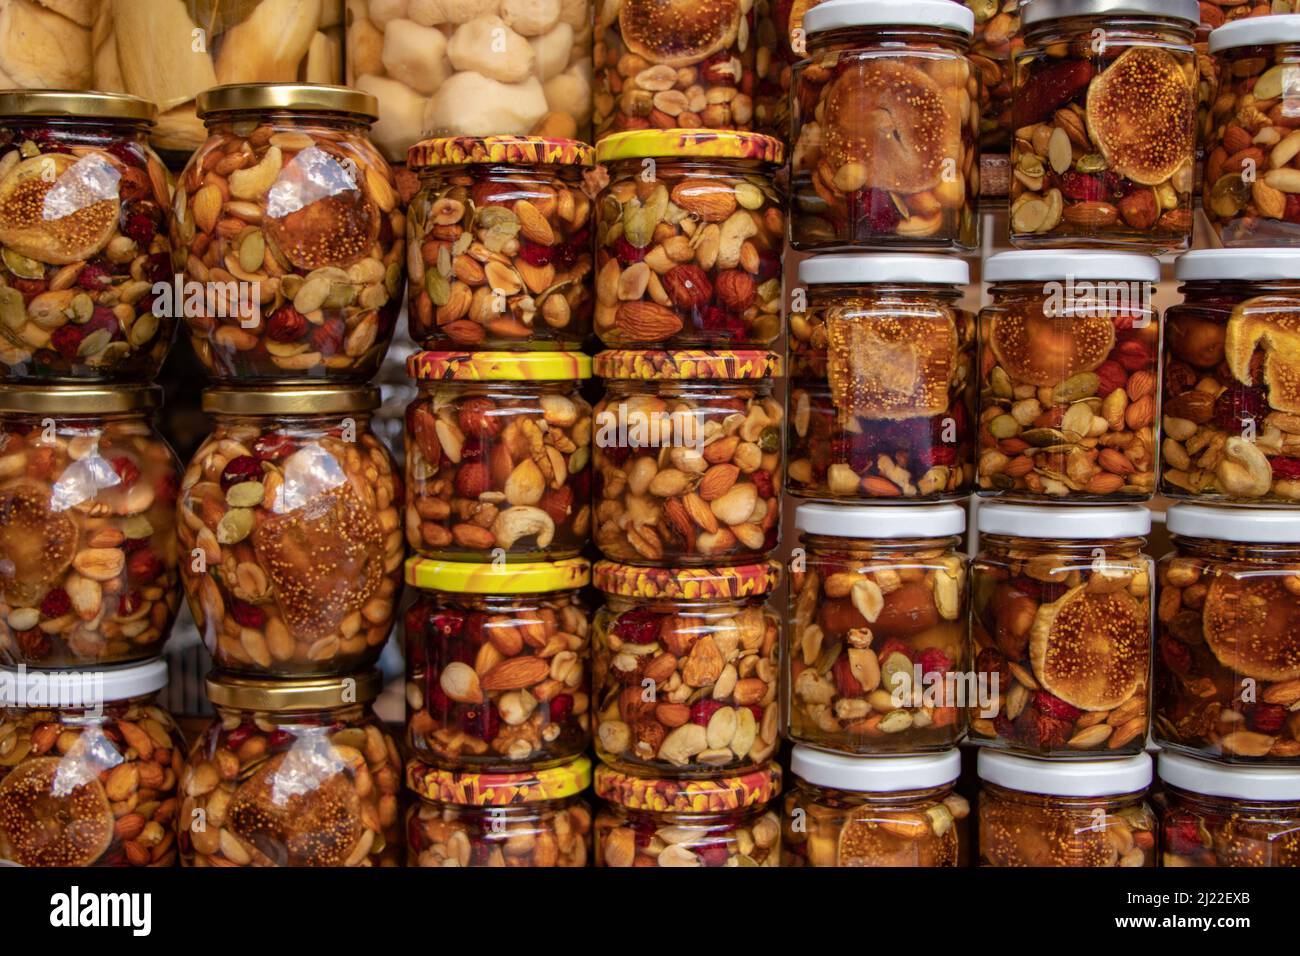 https://c8.alamy.com/comp/2J22EXB/nuts-with-honey-in-glass-jars-harvest-of-nuts-delicacy-and-healthy-food-homemade-preservation-in-autumn-2J22EXB.jpg